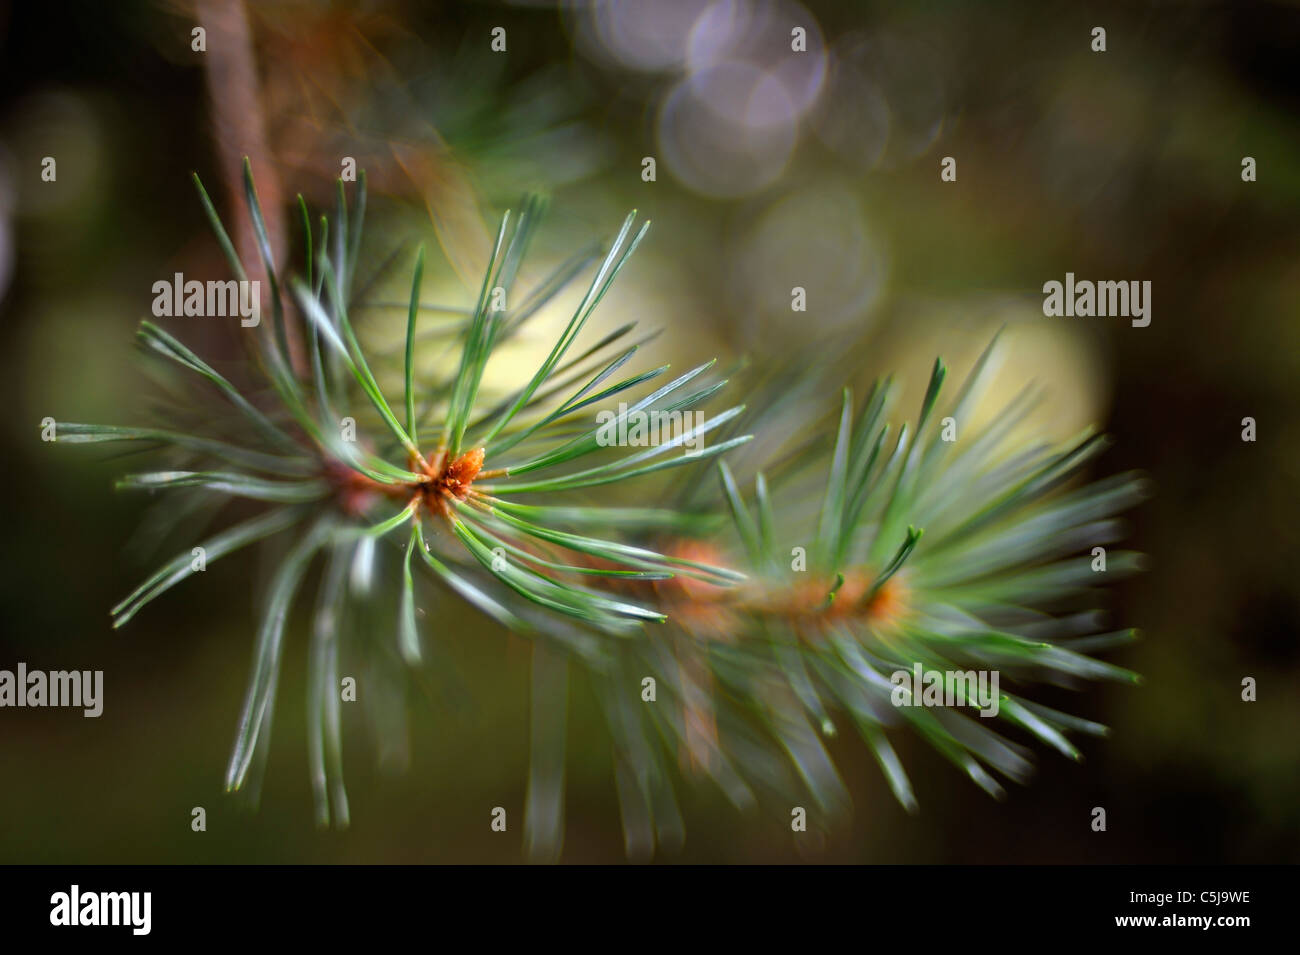 Close-up of Scots pine needles Pinus Sylvestris with shallow depth of field and interesting bokeh. Stock Photo